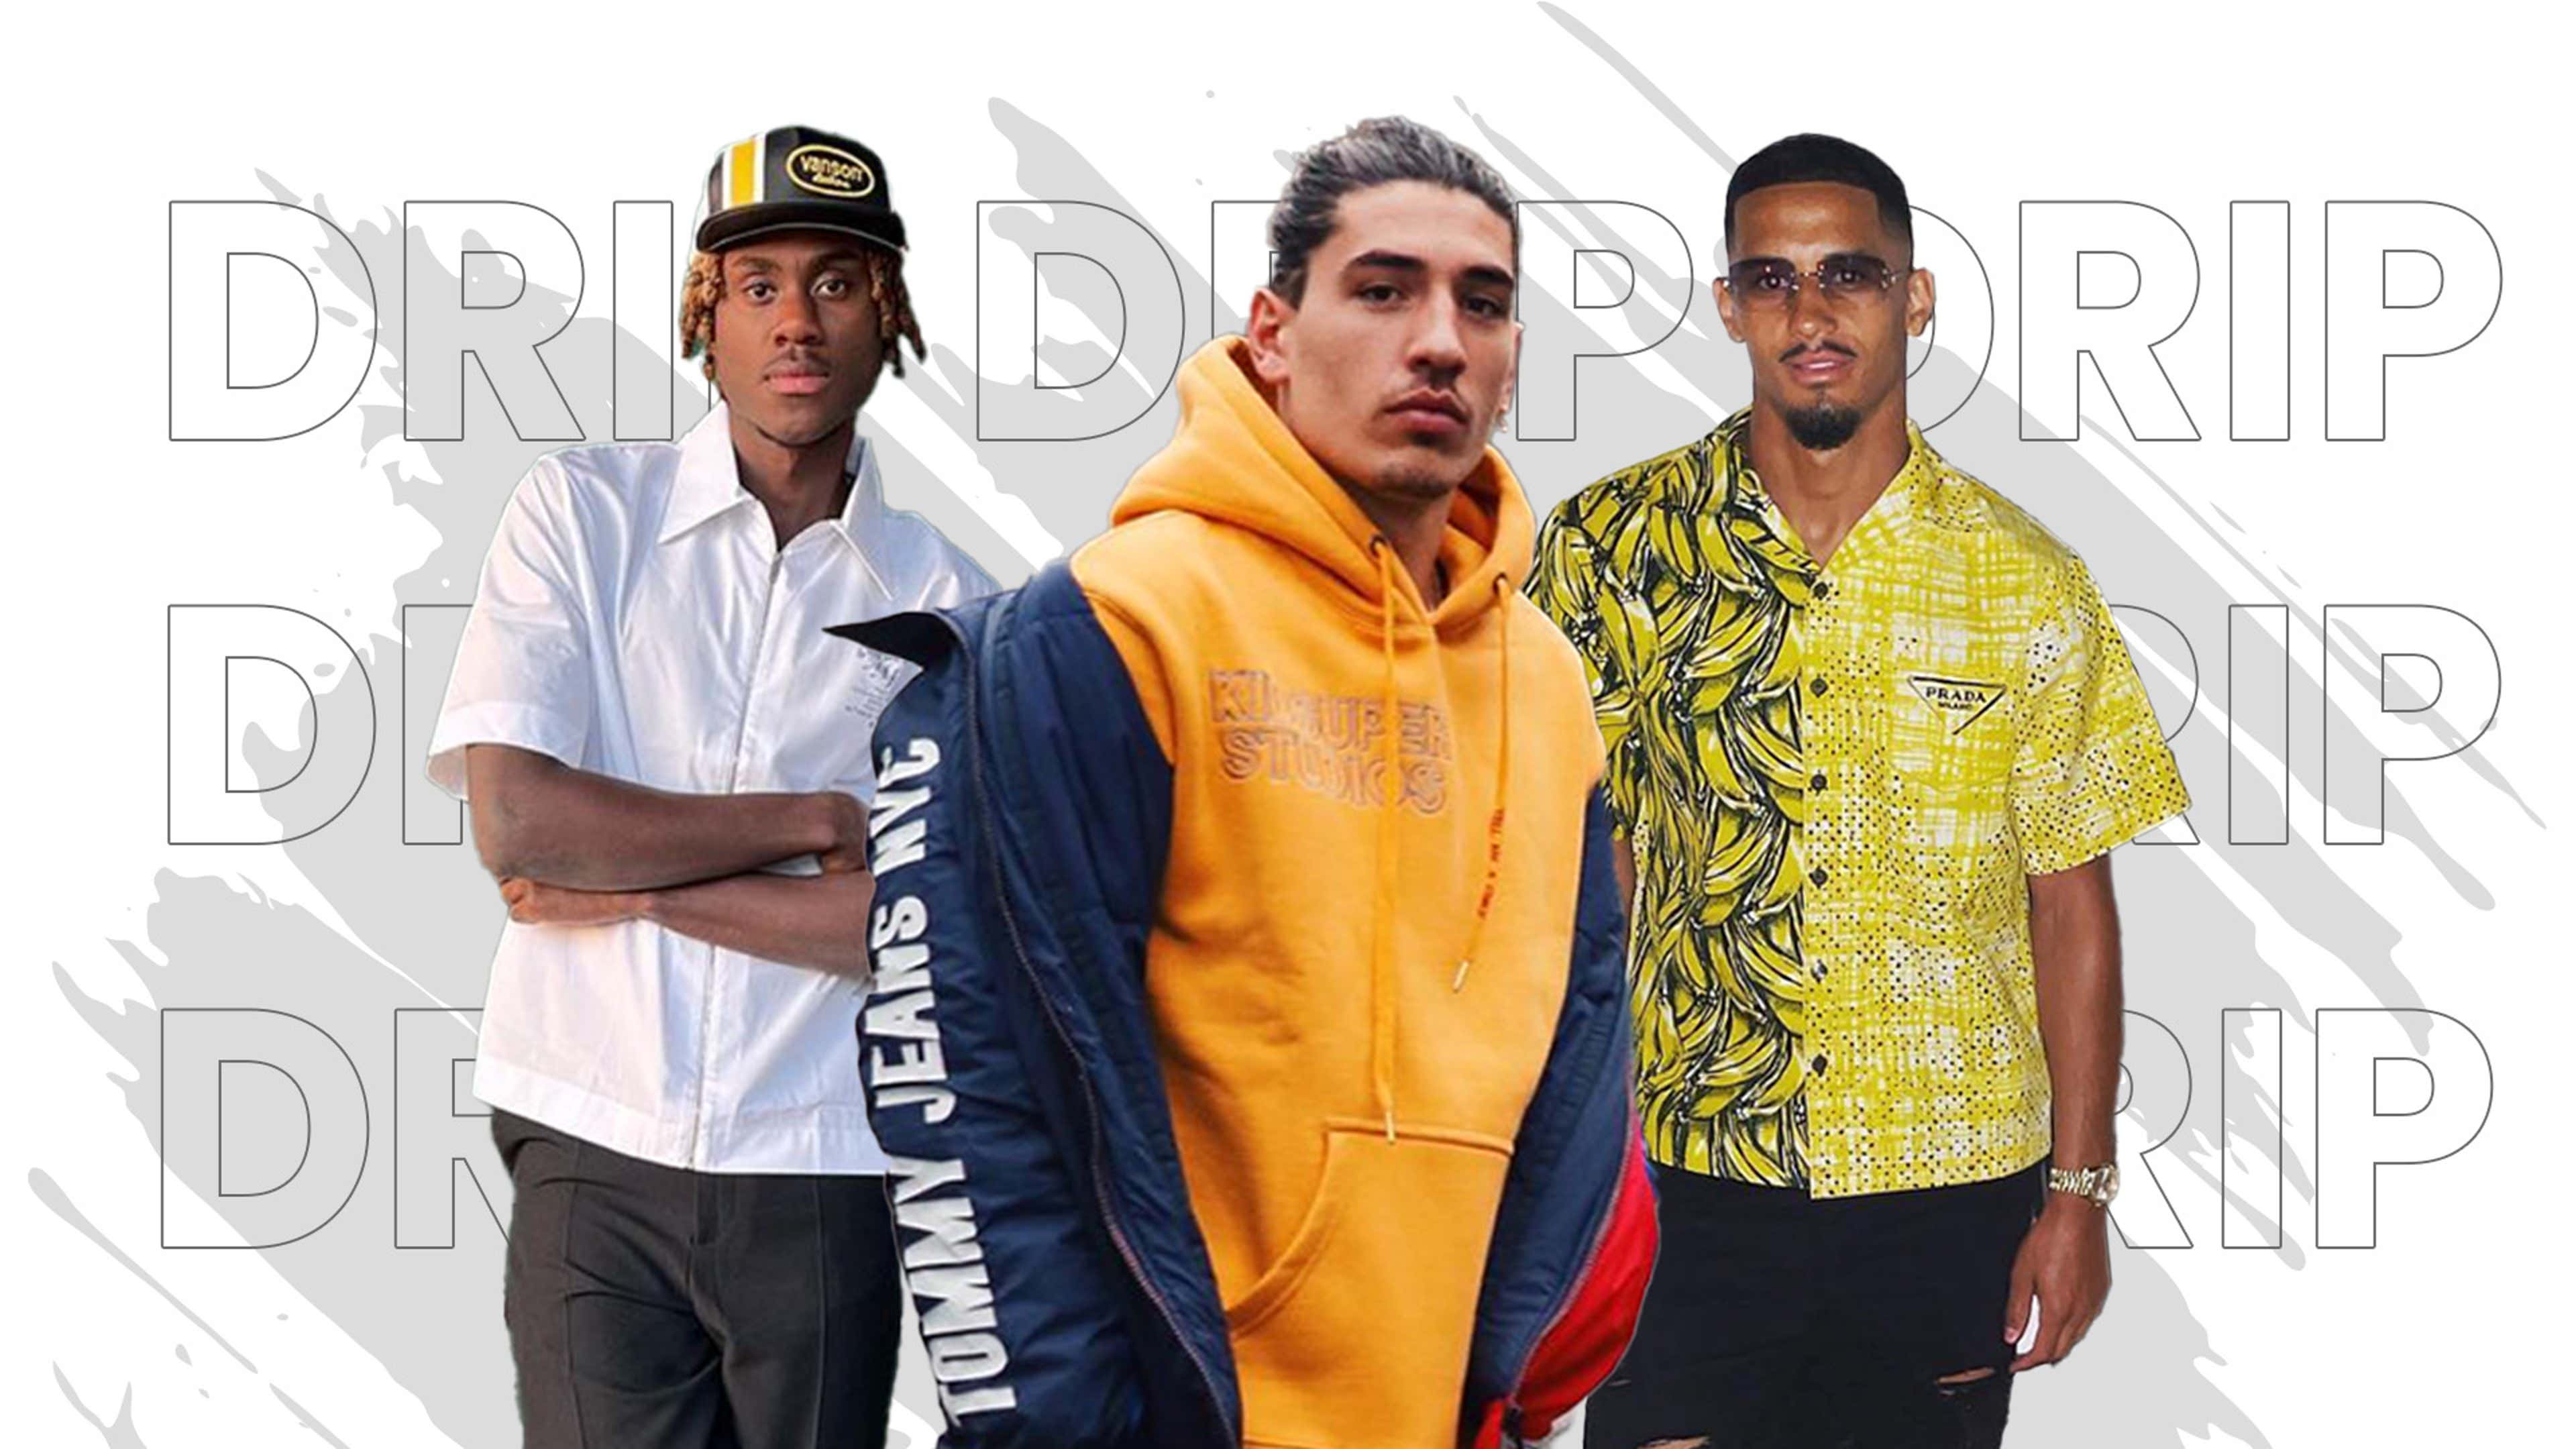 The Best Dressed Premier League footballers: Hector Bellerin, Jack Grealish  and William Saliba bring the drip